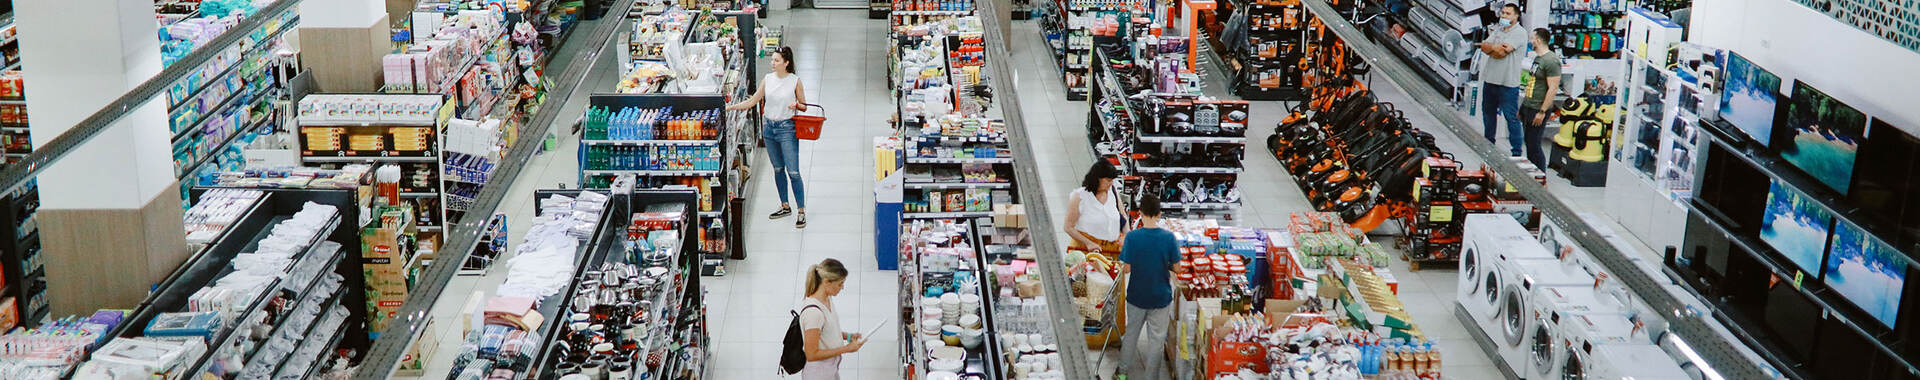 Overhead view of many people shopping in a large supermarket